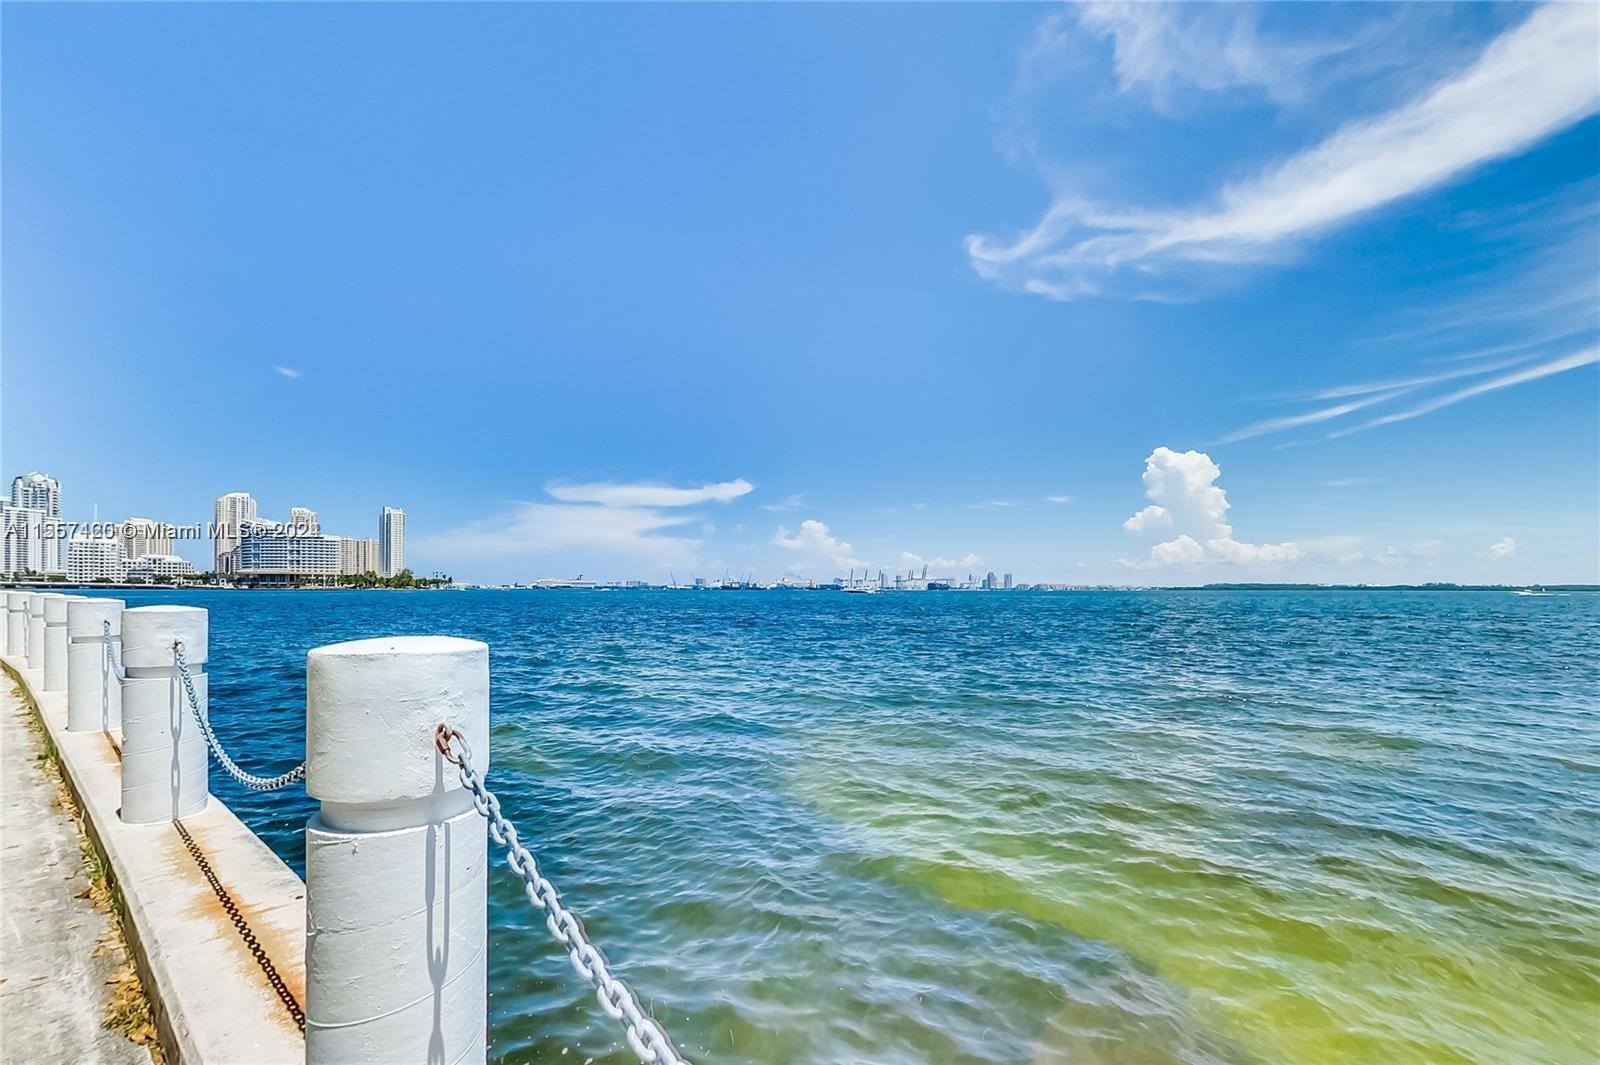 Enjoy the beautiful view of Biscayne Bay in this fully remodeled 1 bedroom 1 bathroom unit with designer details all around! White porcelain floor throughout, new white kitchen, new bathroom, and lots of closets. Washer & dryer inside the unit! 24 hour security, air conditioning and hot water included. Pool, BBQ area and gym on premises. Enjoy living just steps away from the trendy Brickell area! Unit is vacant and very easy to show! Just call listing agent to schedule your visit!